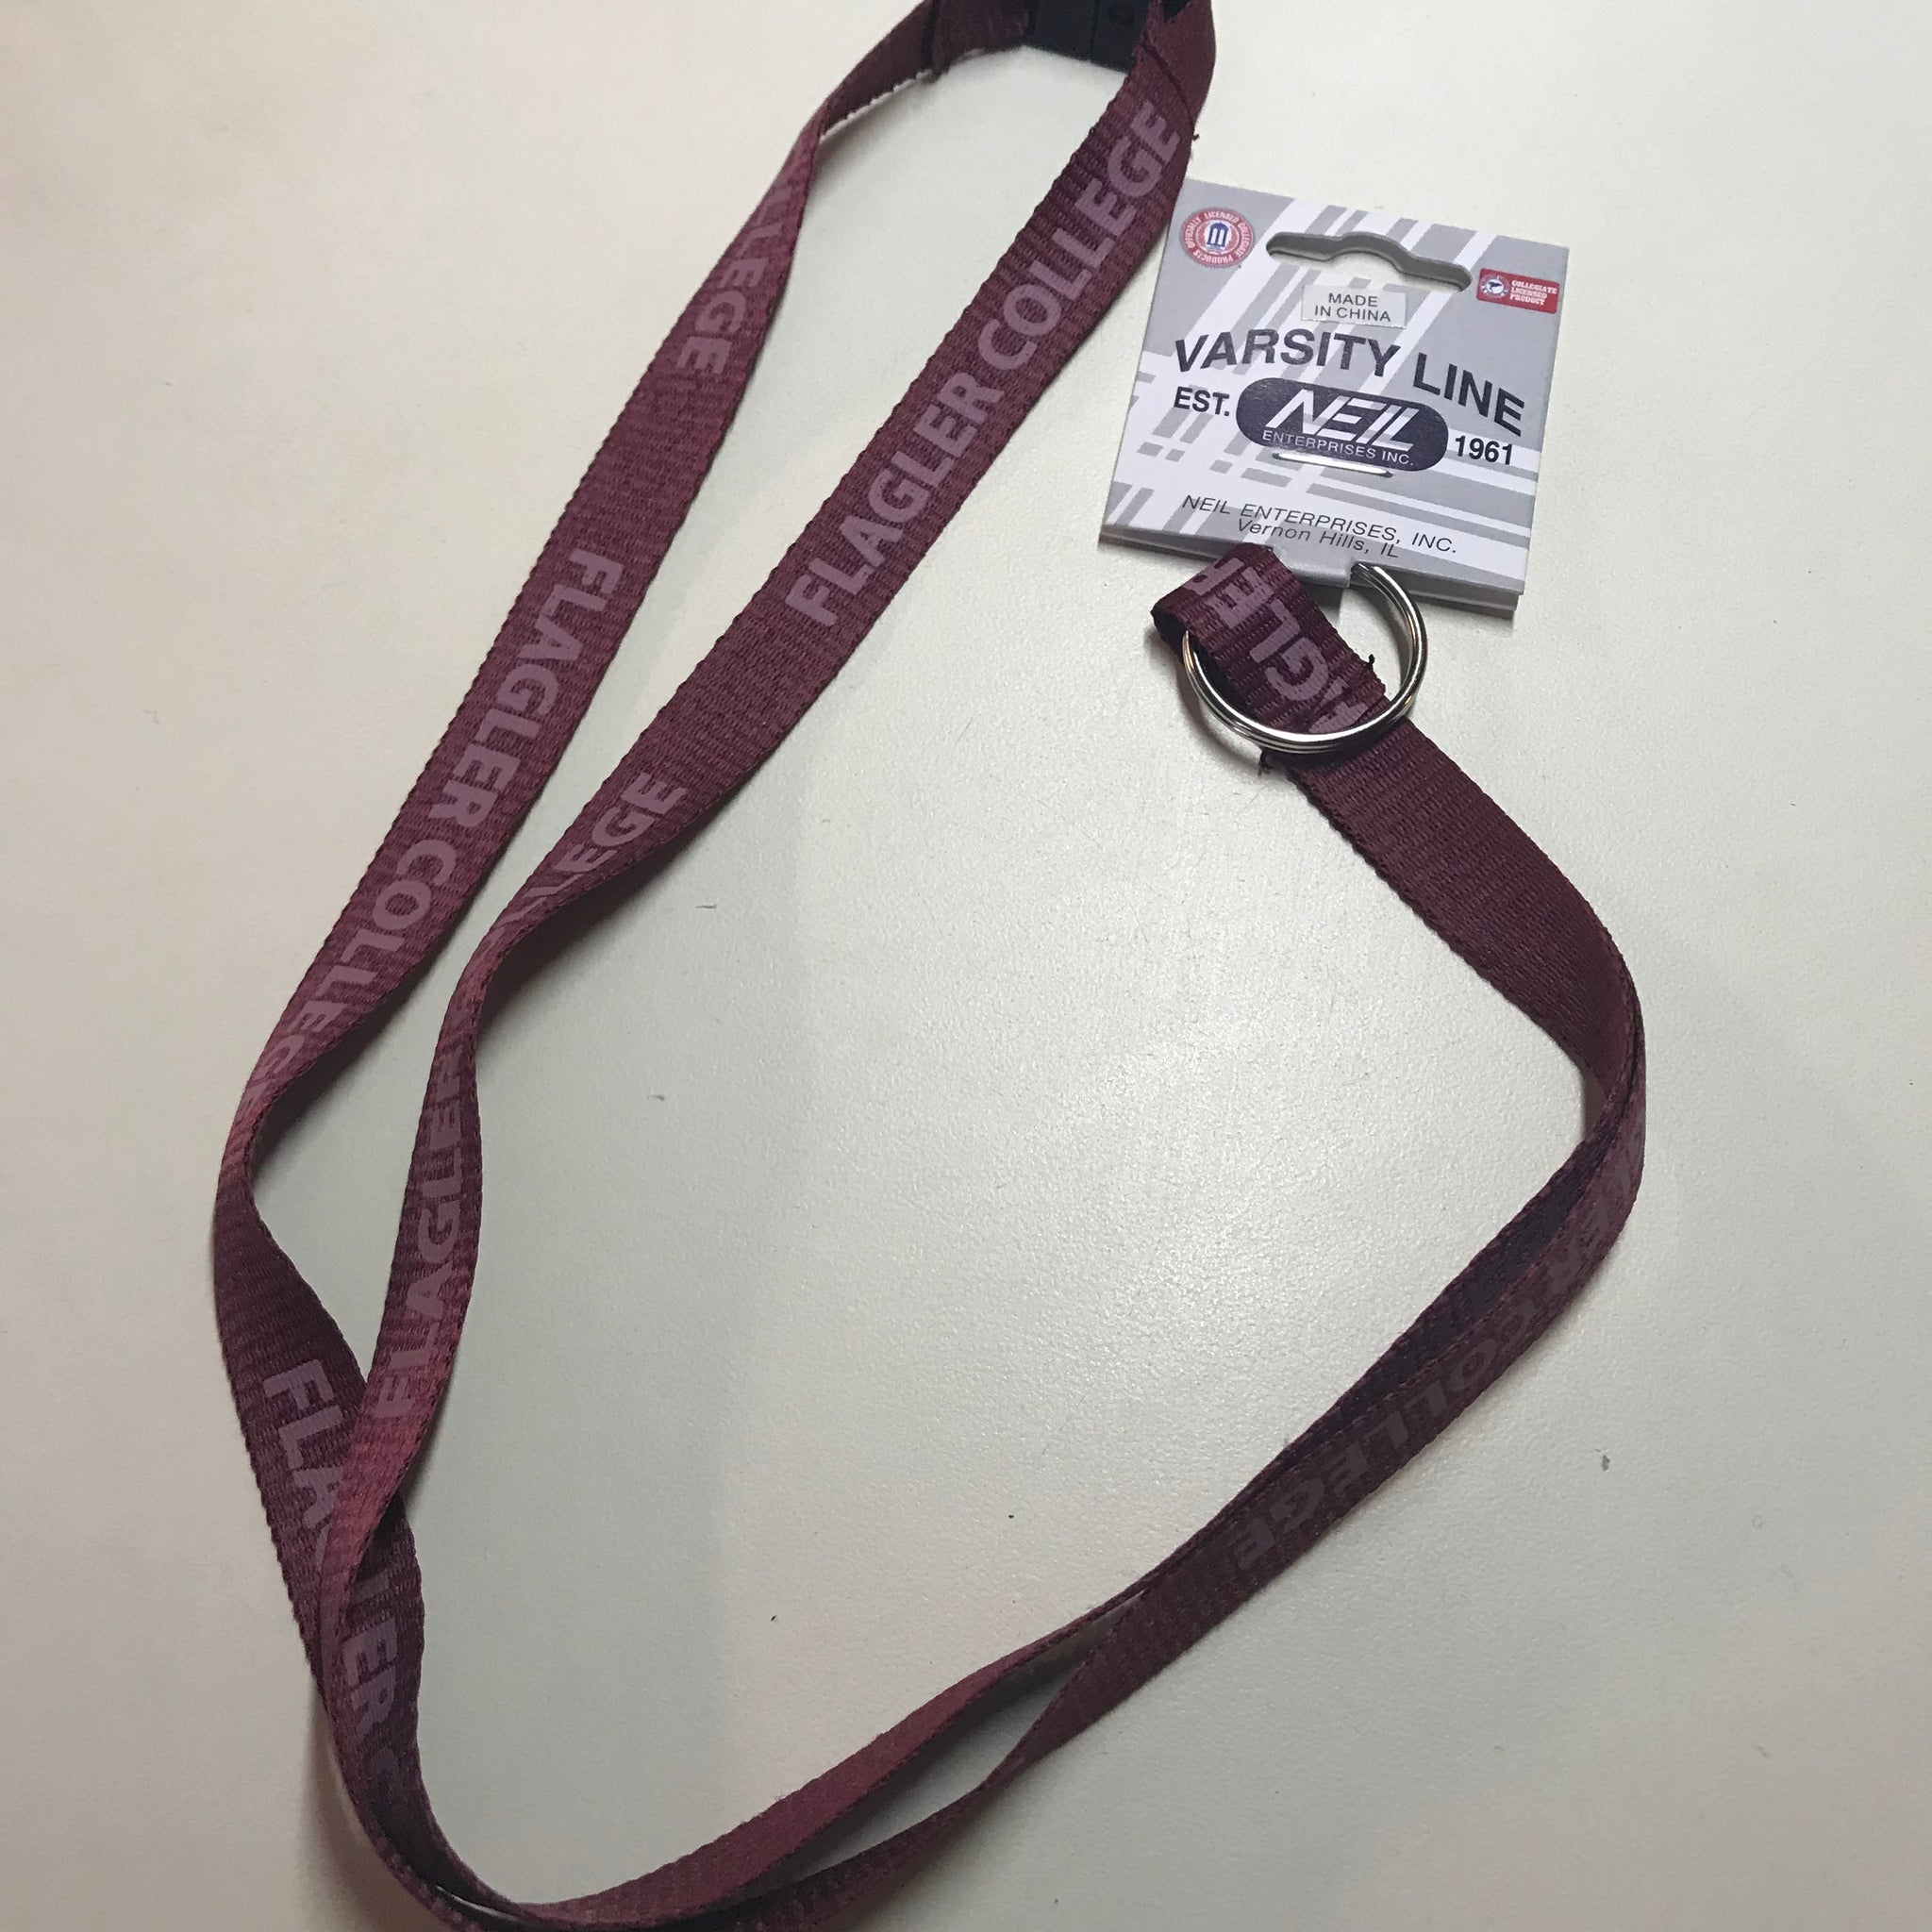 red lanyard with a pattern of Flagler College printed in a muted red